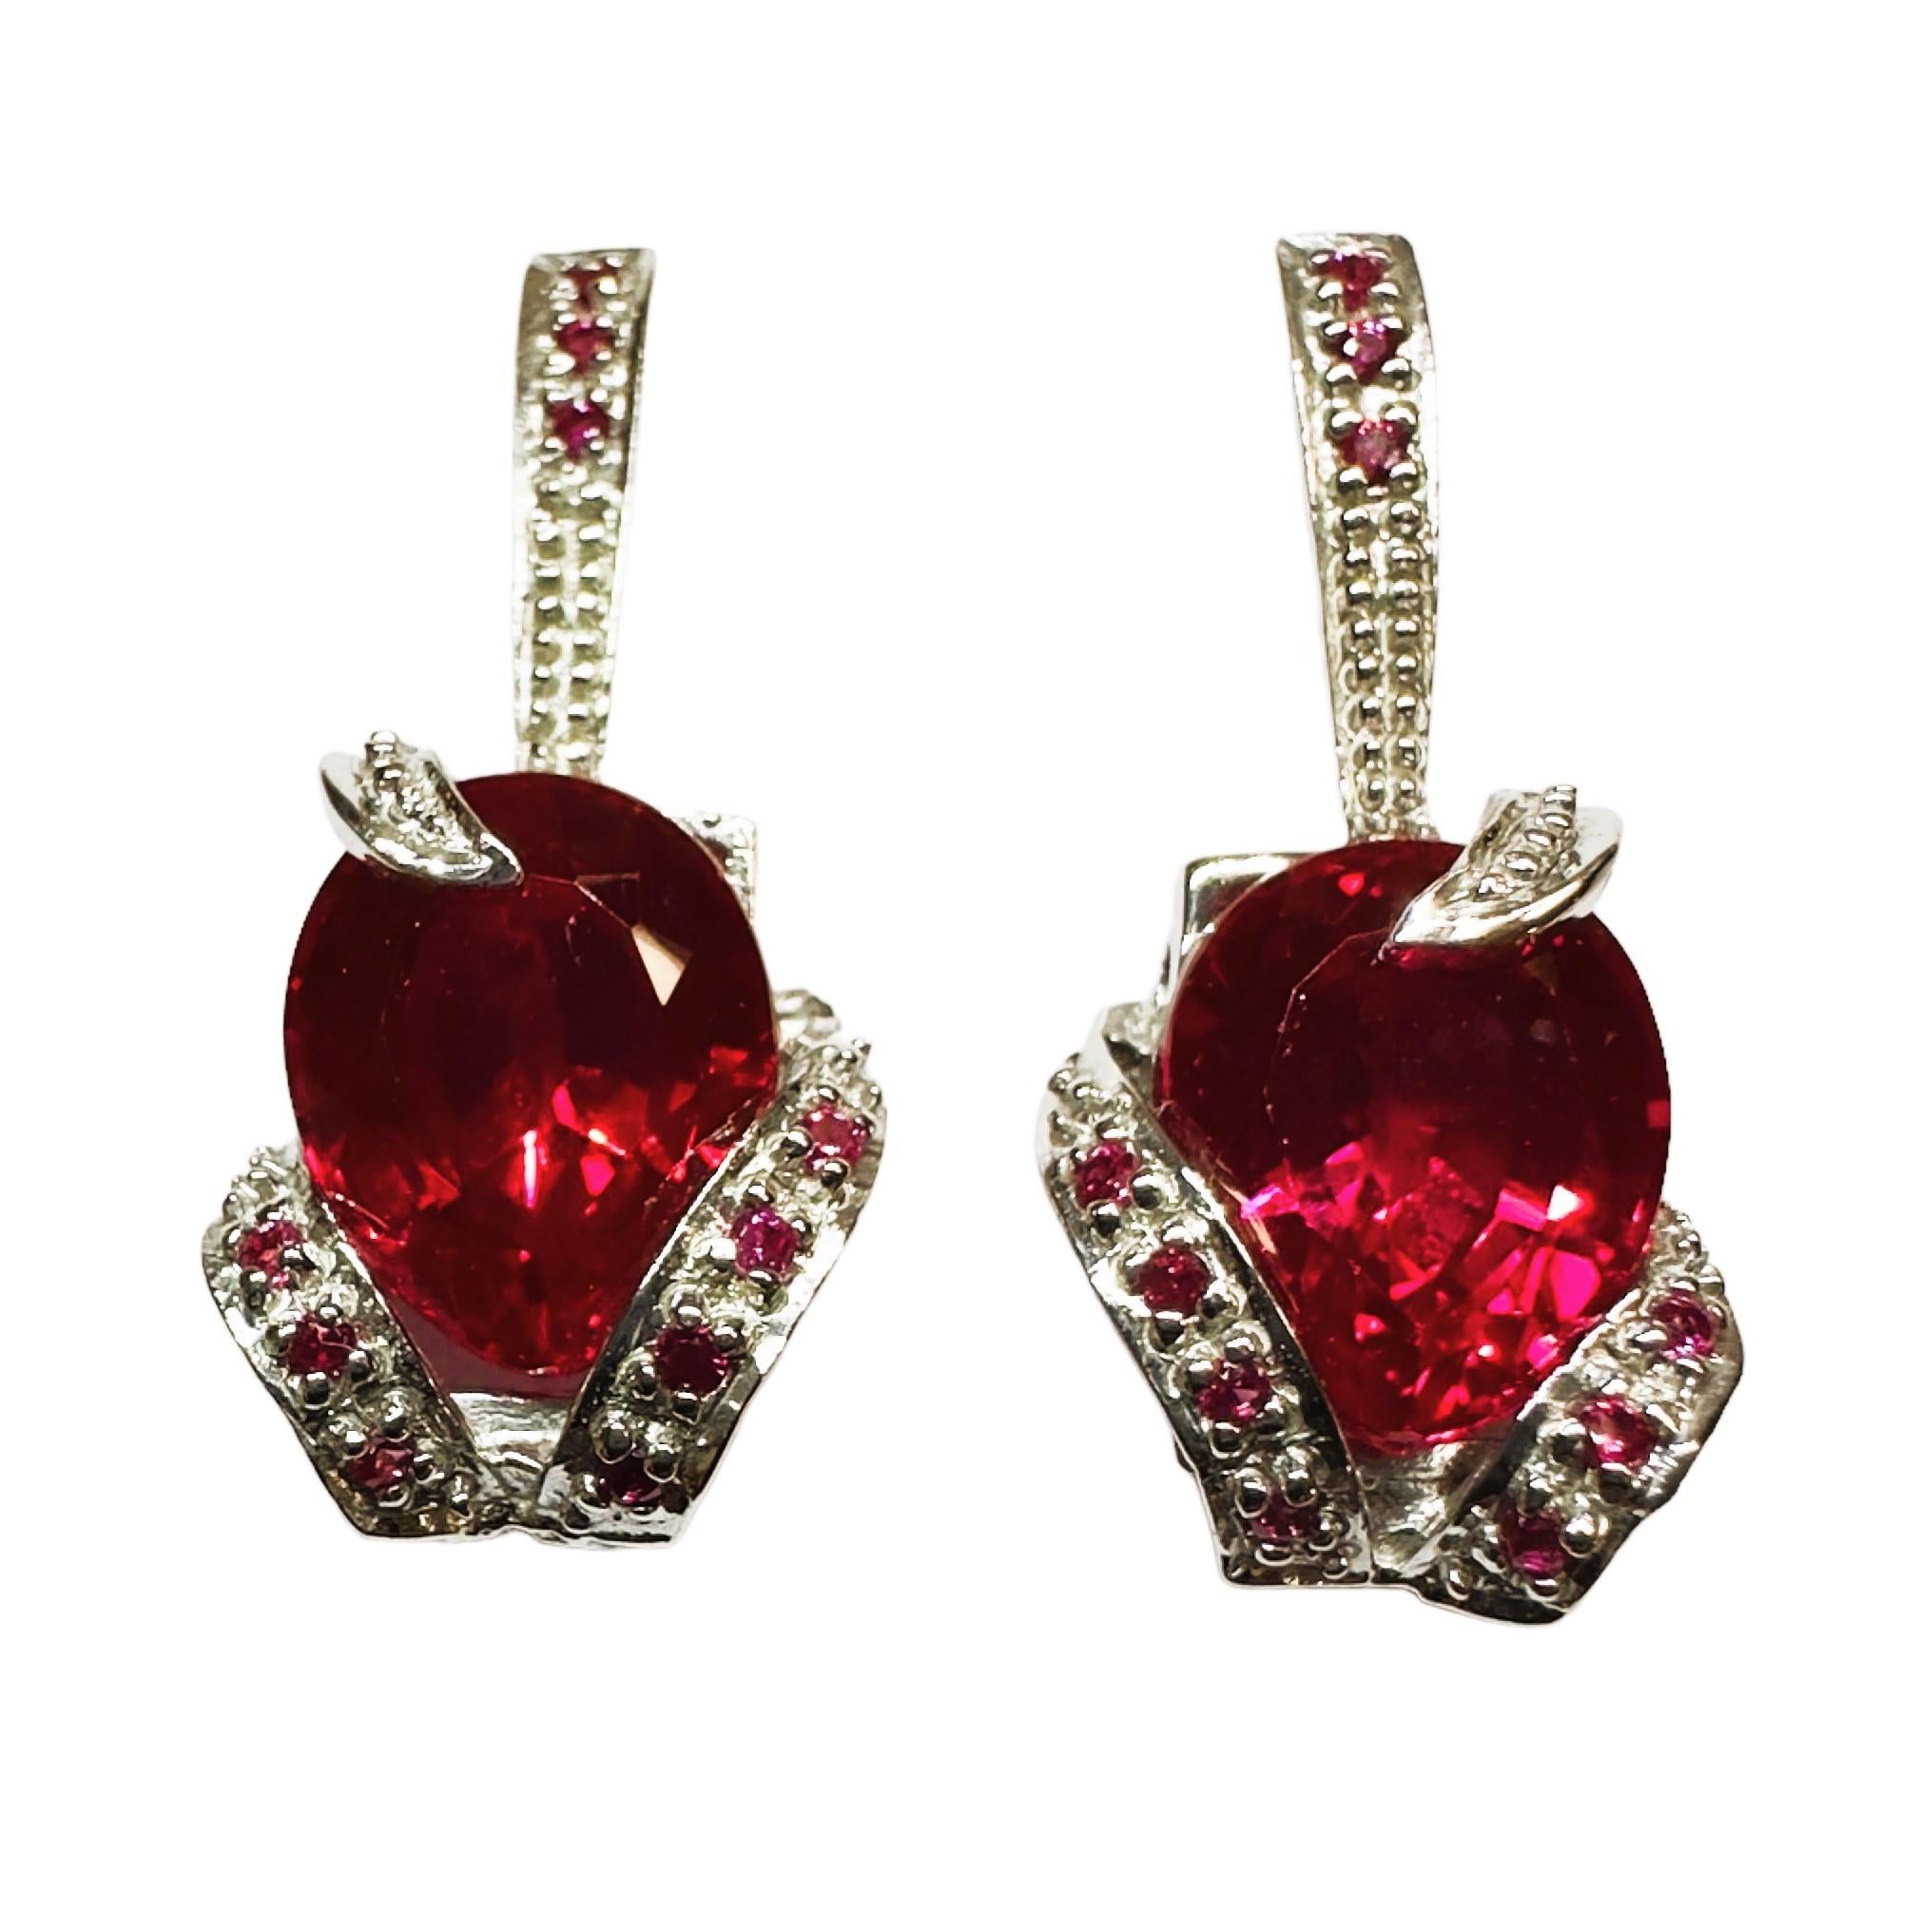 Oval Cut New African 9.70 Ct Pinkish Red Sapphire Sterling Earrings